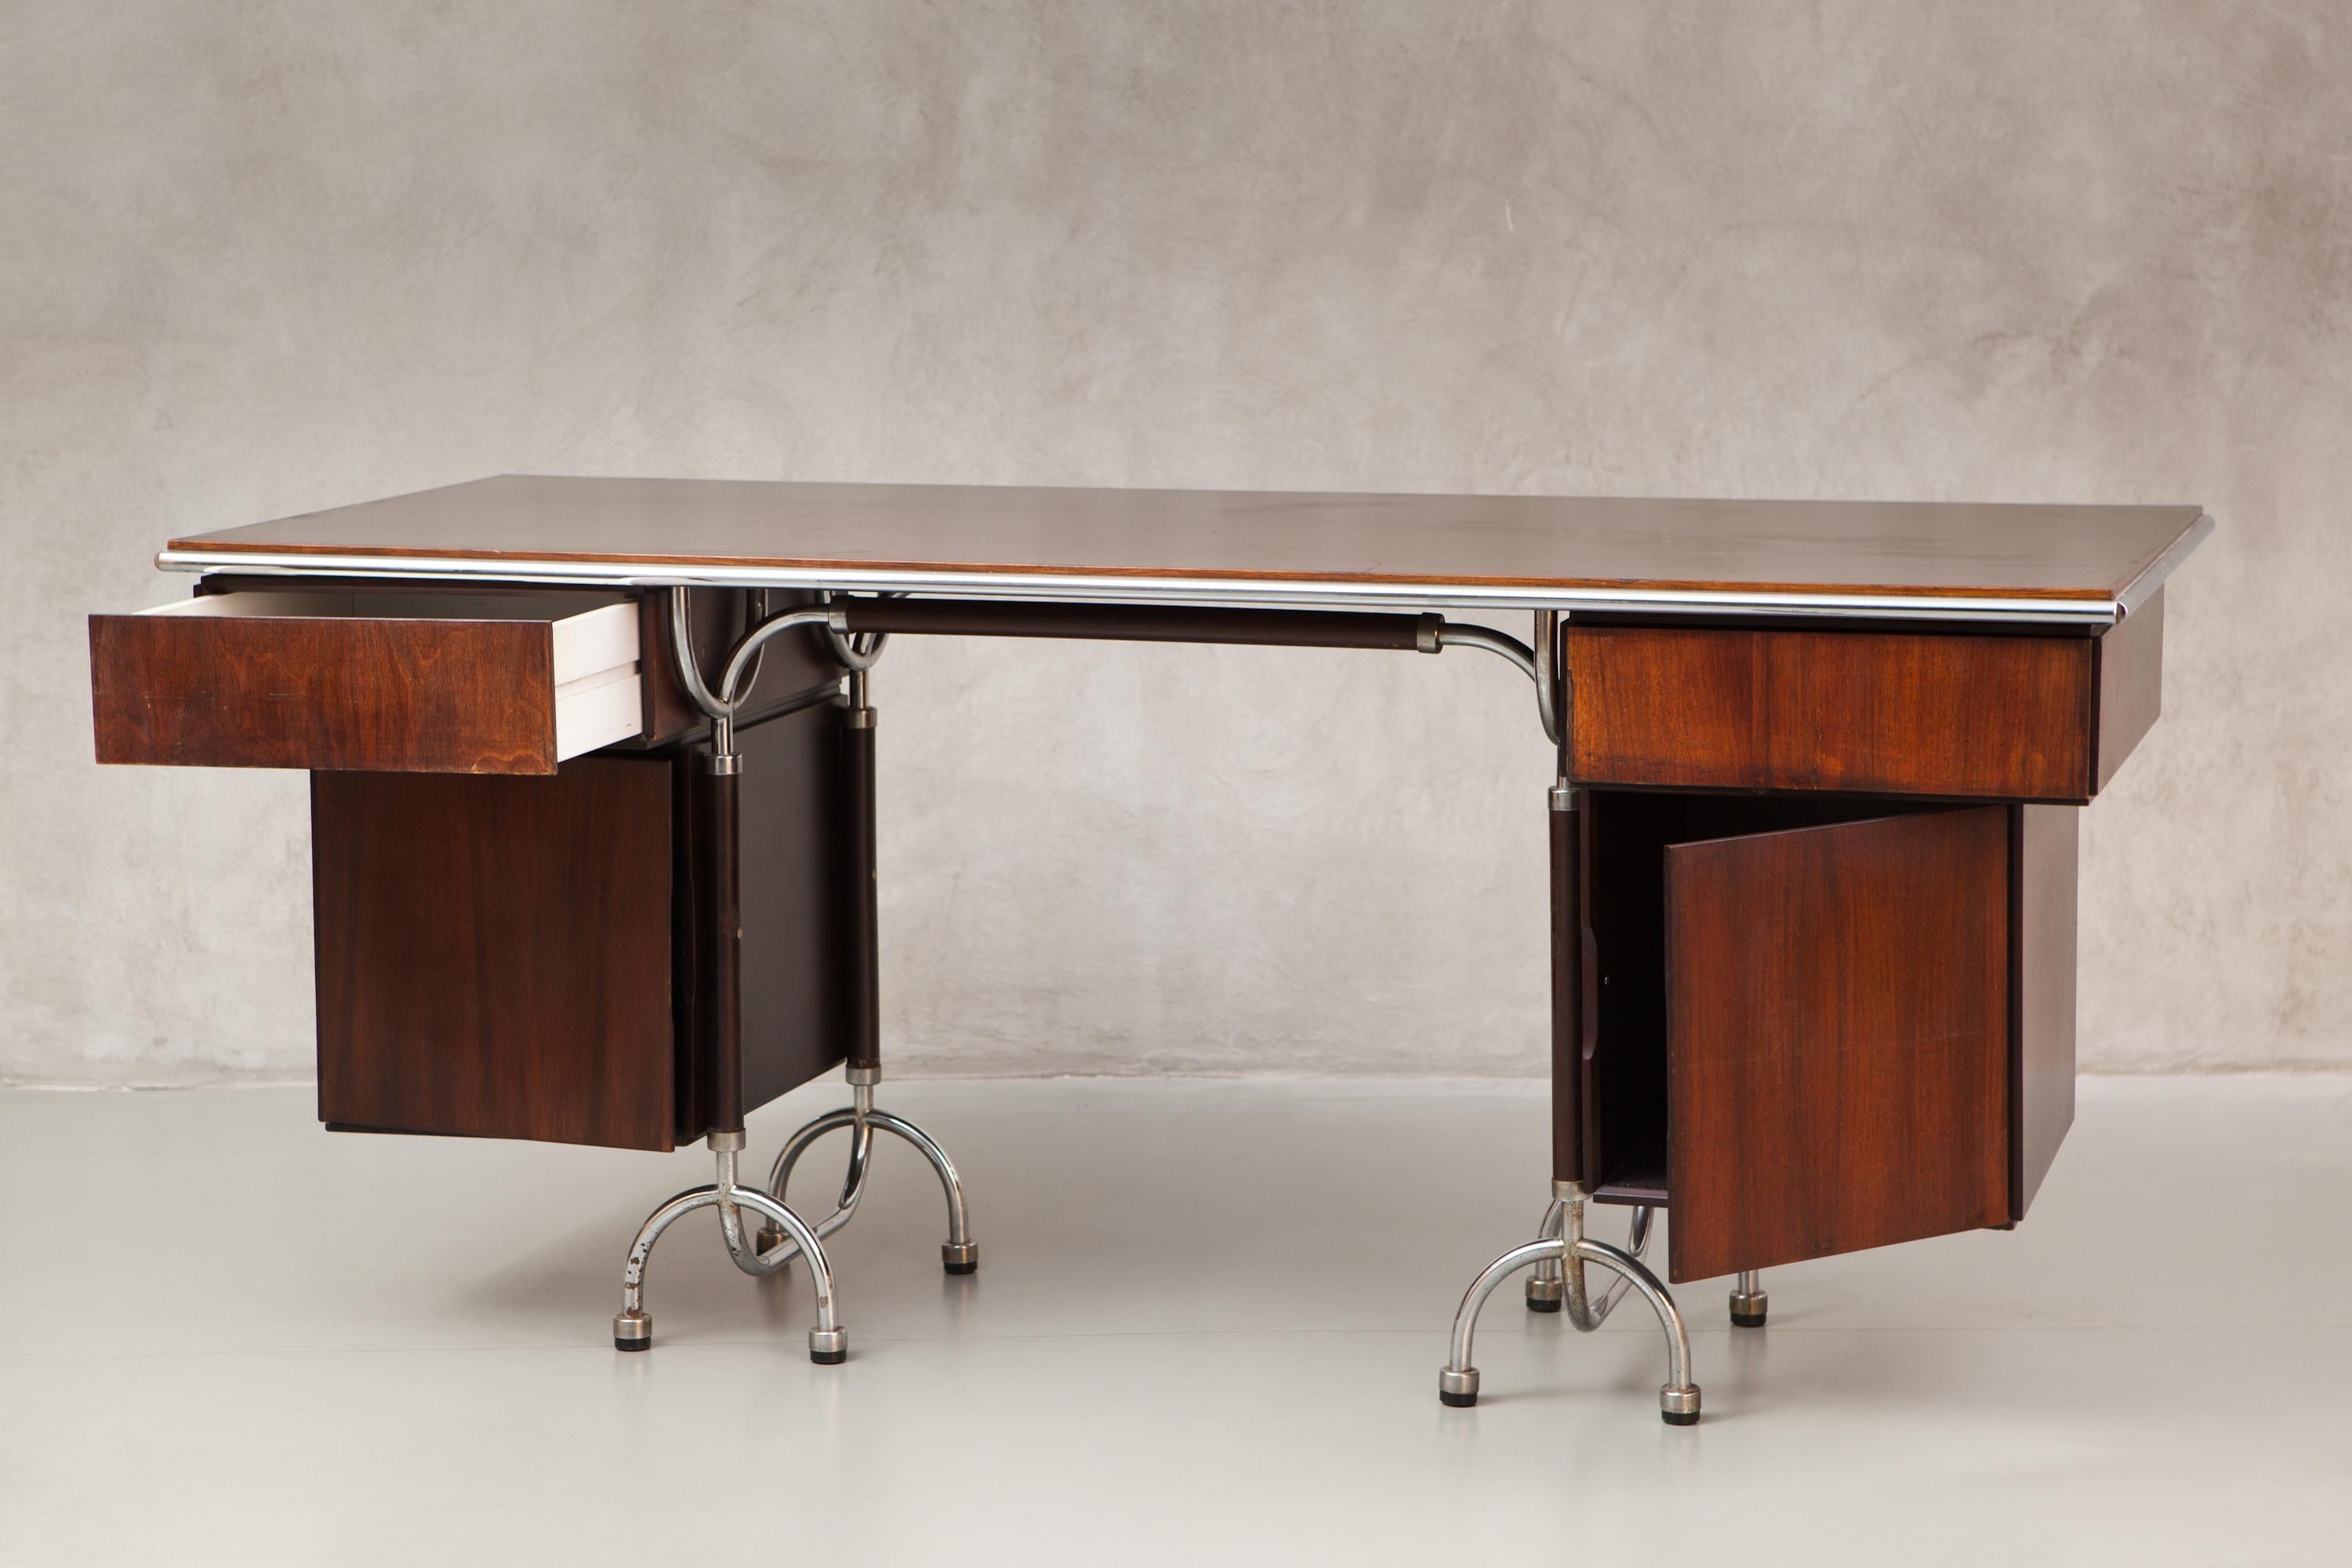 Desk by Roberto Gabetti, Aimaro Isola and Guido Drocco, Italy, 1970s. Manufactured by Arbo. Limited series. Chromed metal, wood. Reference: F. Ferrari, Gabetti e Isola Mobili: 1950-1970, Allemandi, 1986. Measures: 180 x 82 x H 77.5 cm. 70.8 x 32.3 x